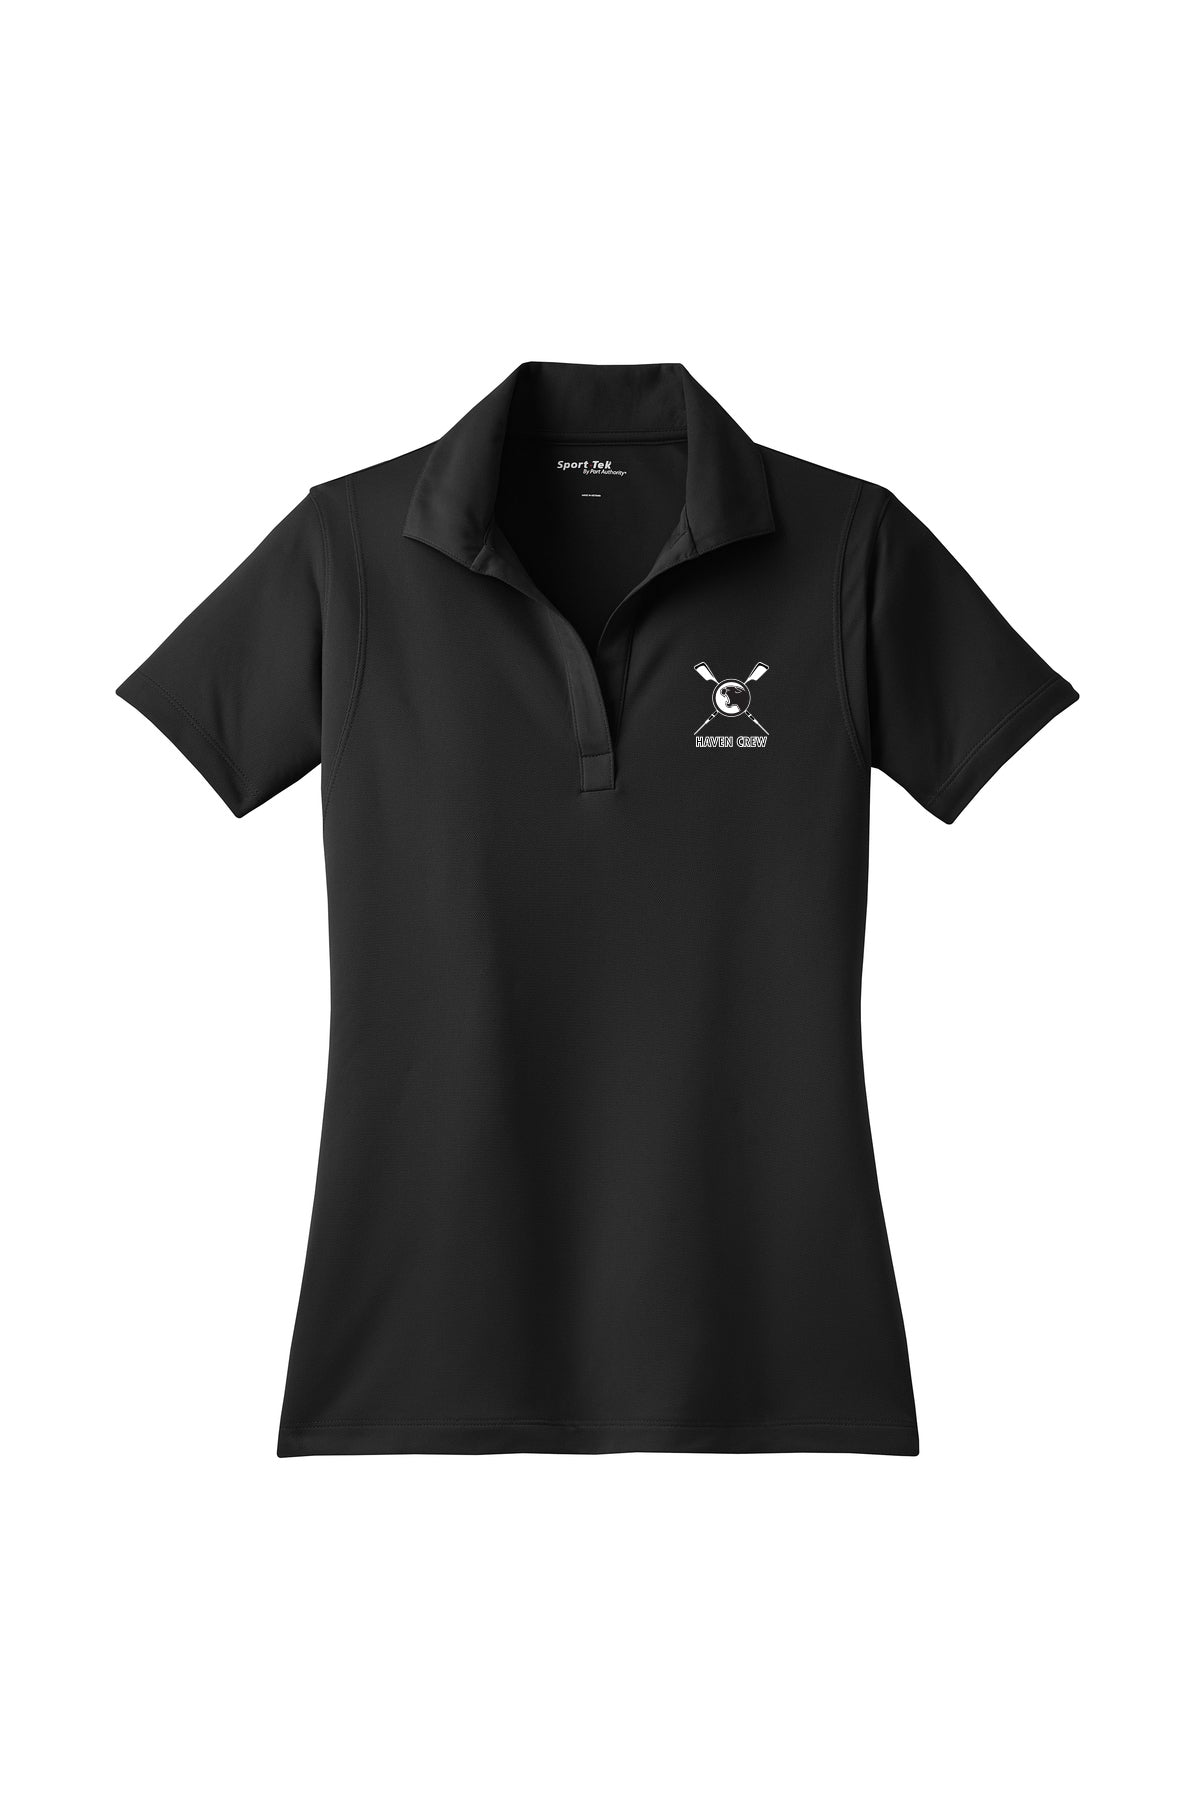 Haven Crew Embroidered Performance Ladies Polo